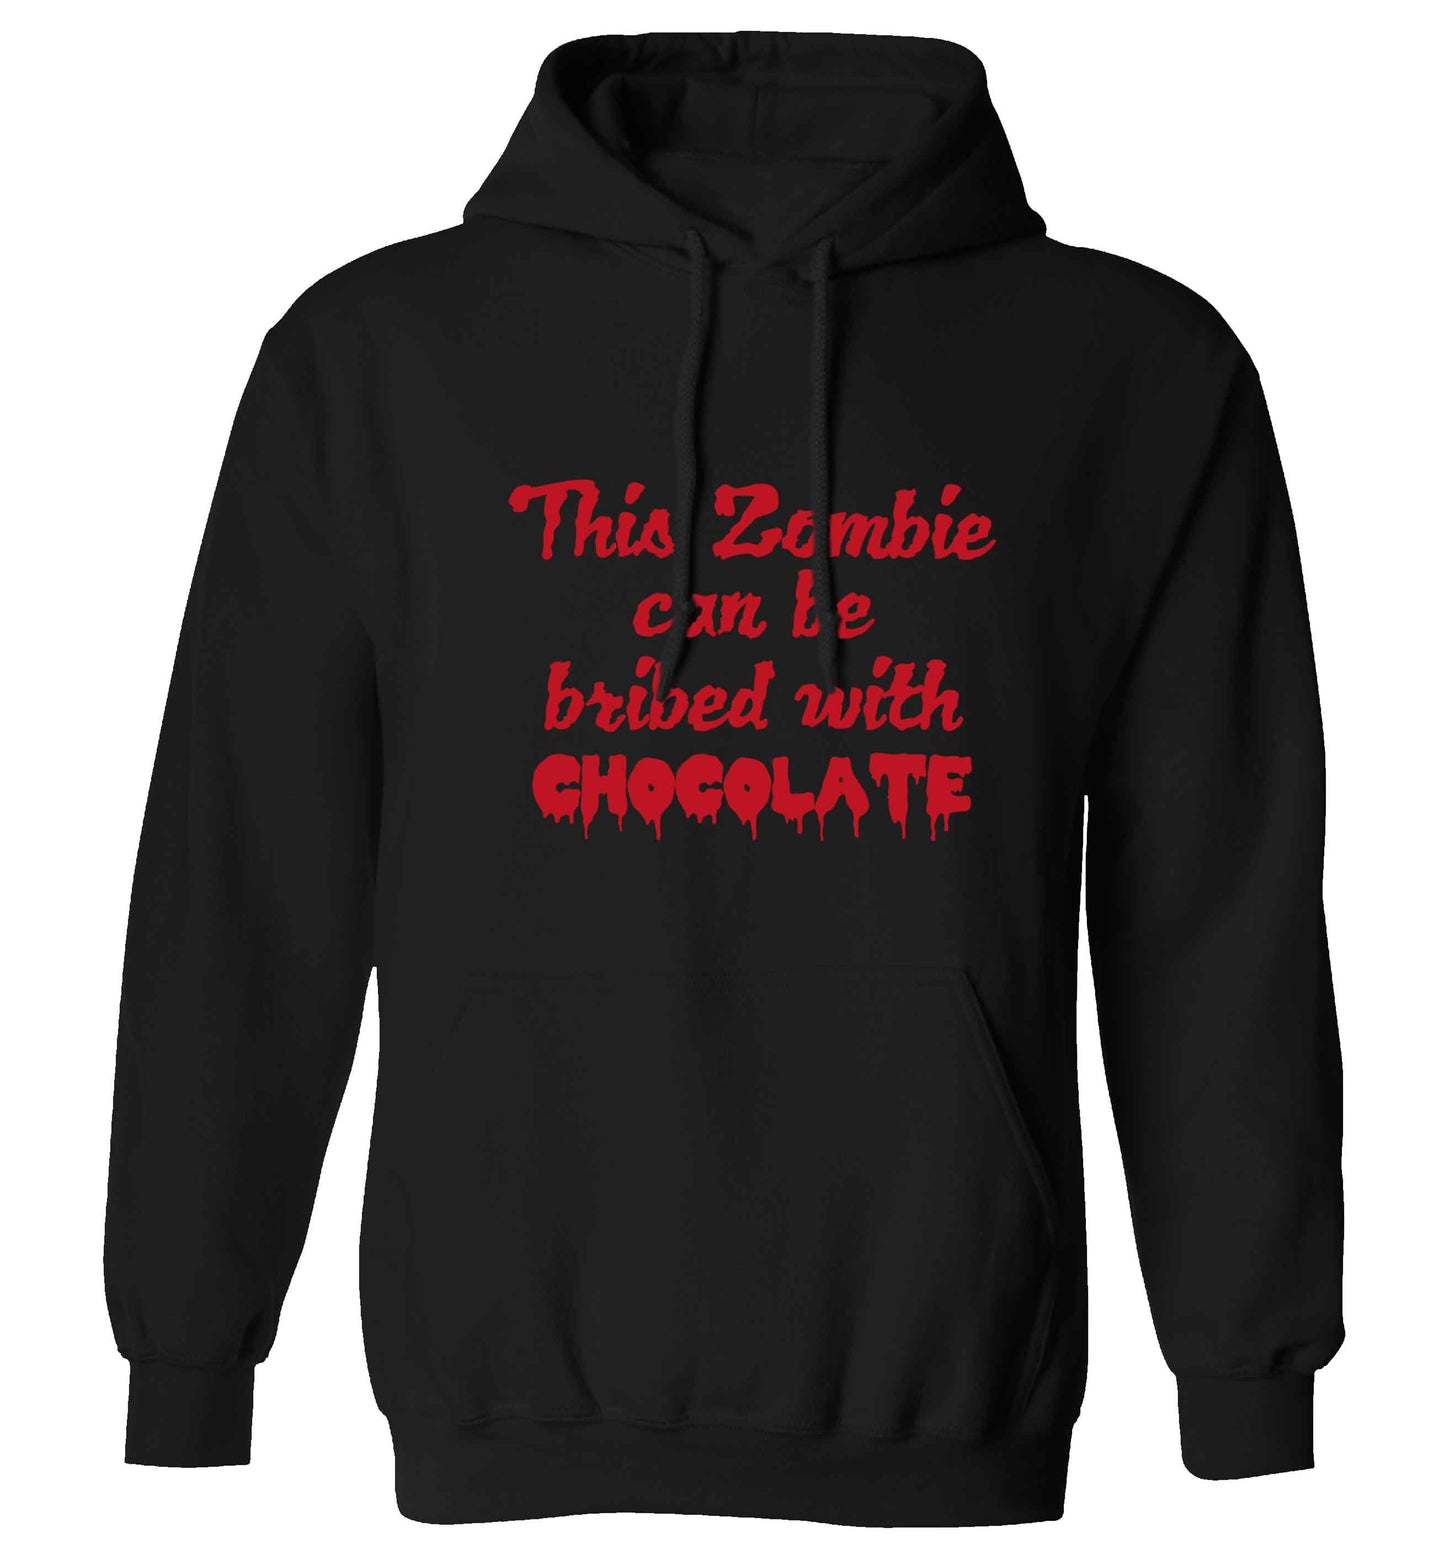 This zombie can be bribed with chocolate adults unisex black hoodie 2XL